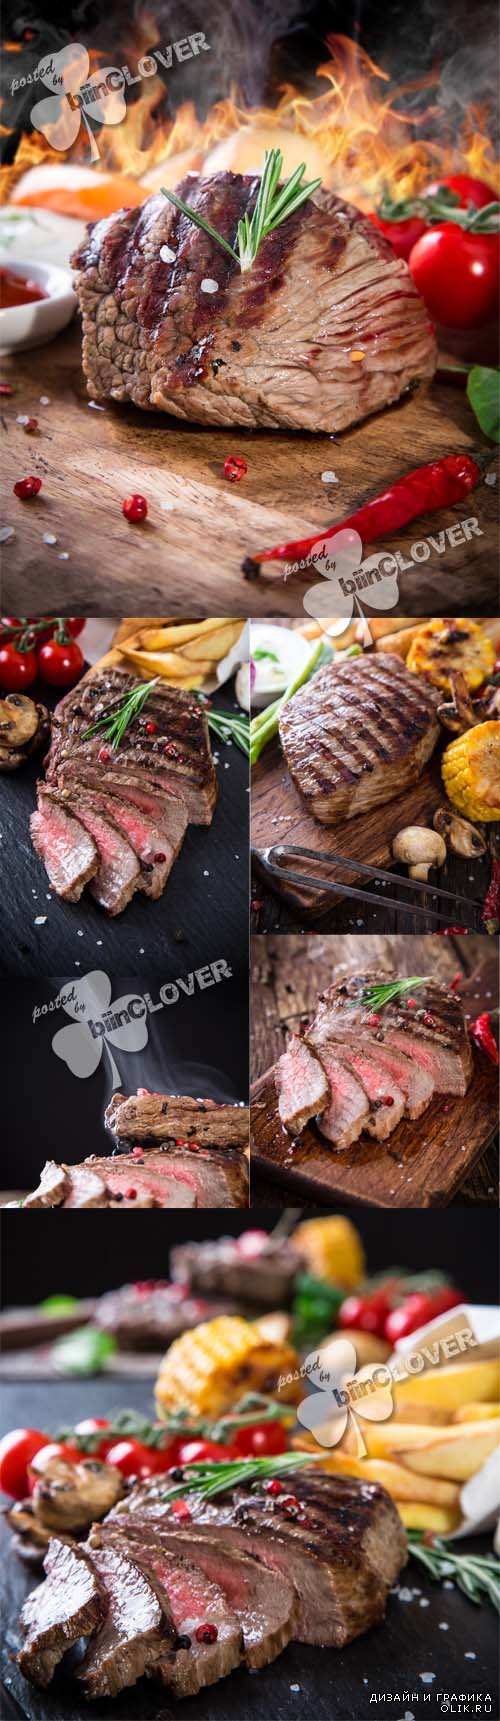 Grilled meat on wooden table 0579